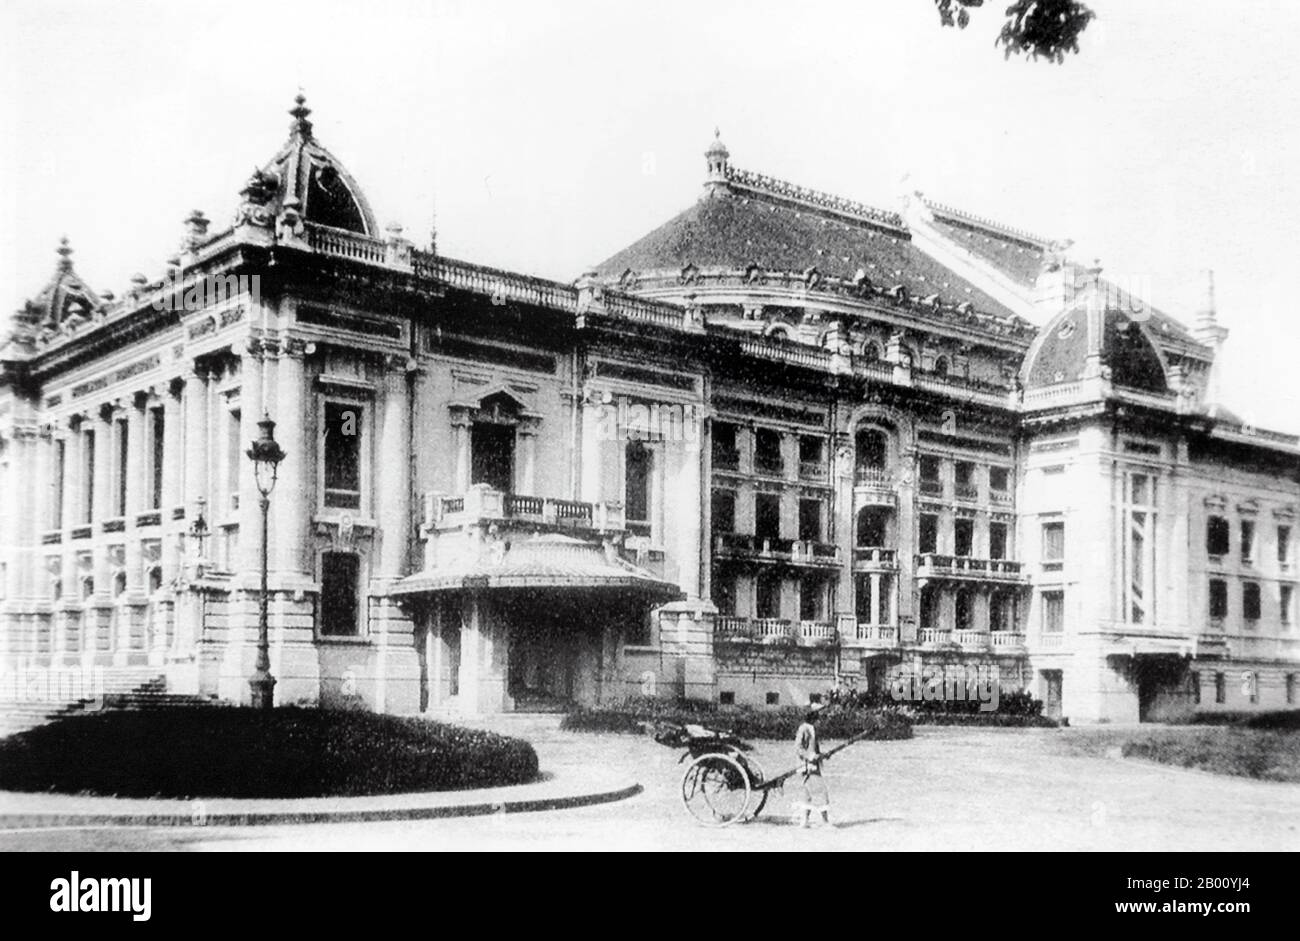 Vietnam: Hanoi Opera House (early 20th century).  Erected by French colonists between 1901 and 1911, the Hanoi Opera House is considered to be a typical French colonial architectural monument in Vietnam. It is a small-scale replica of the Palais Garnier, the older of Paris's two opera houses. Stock Photo